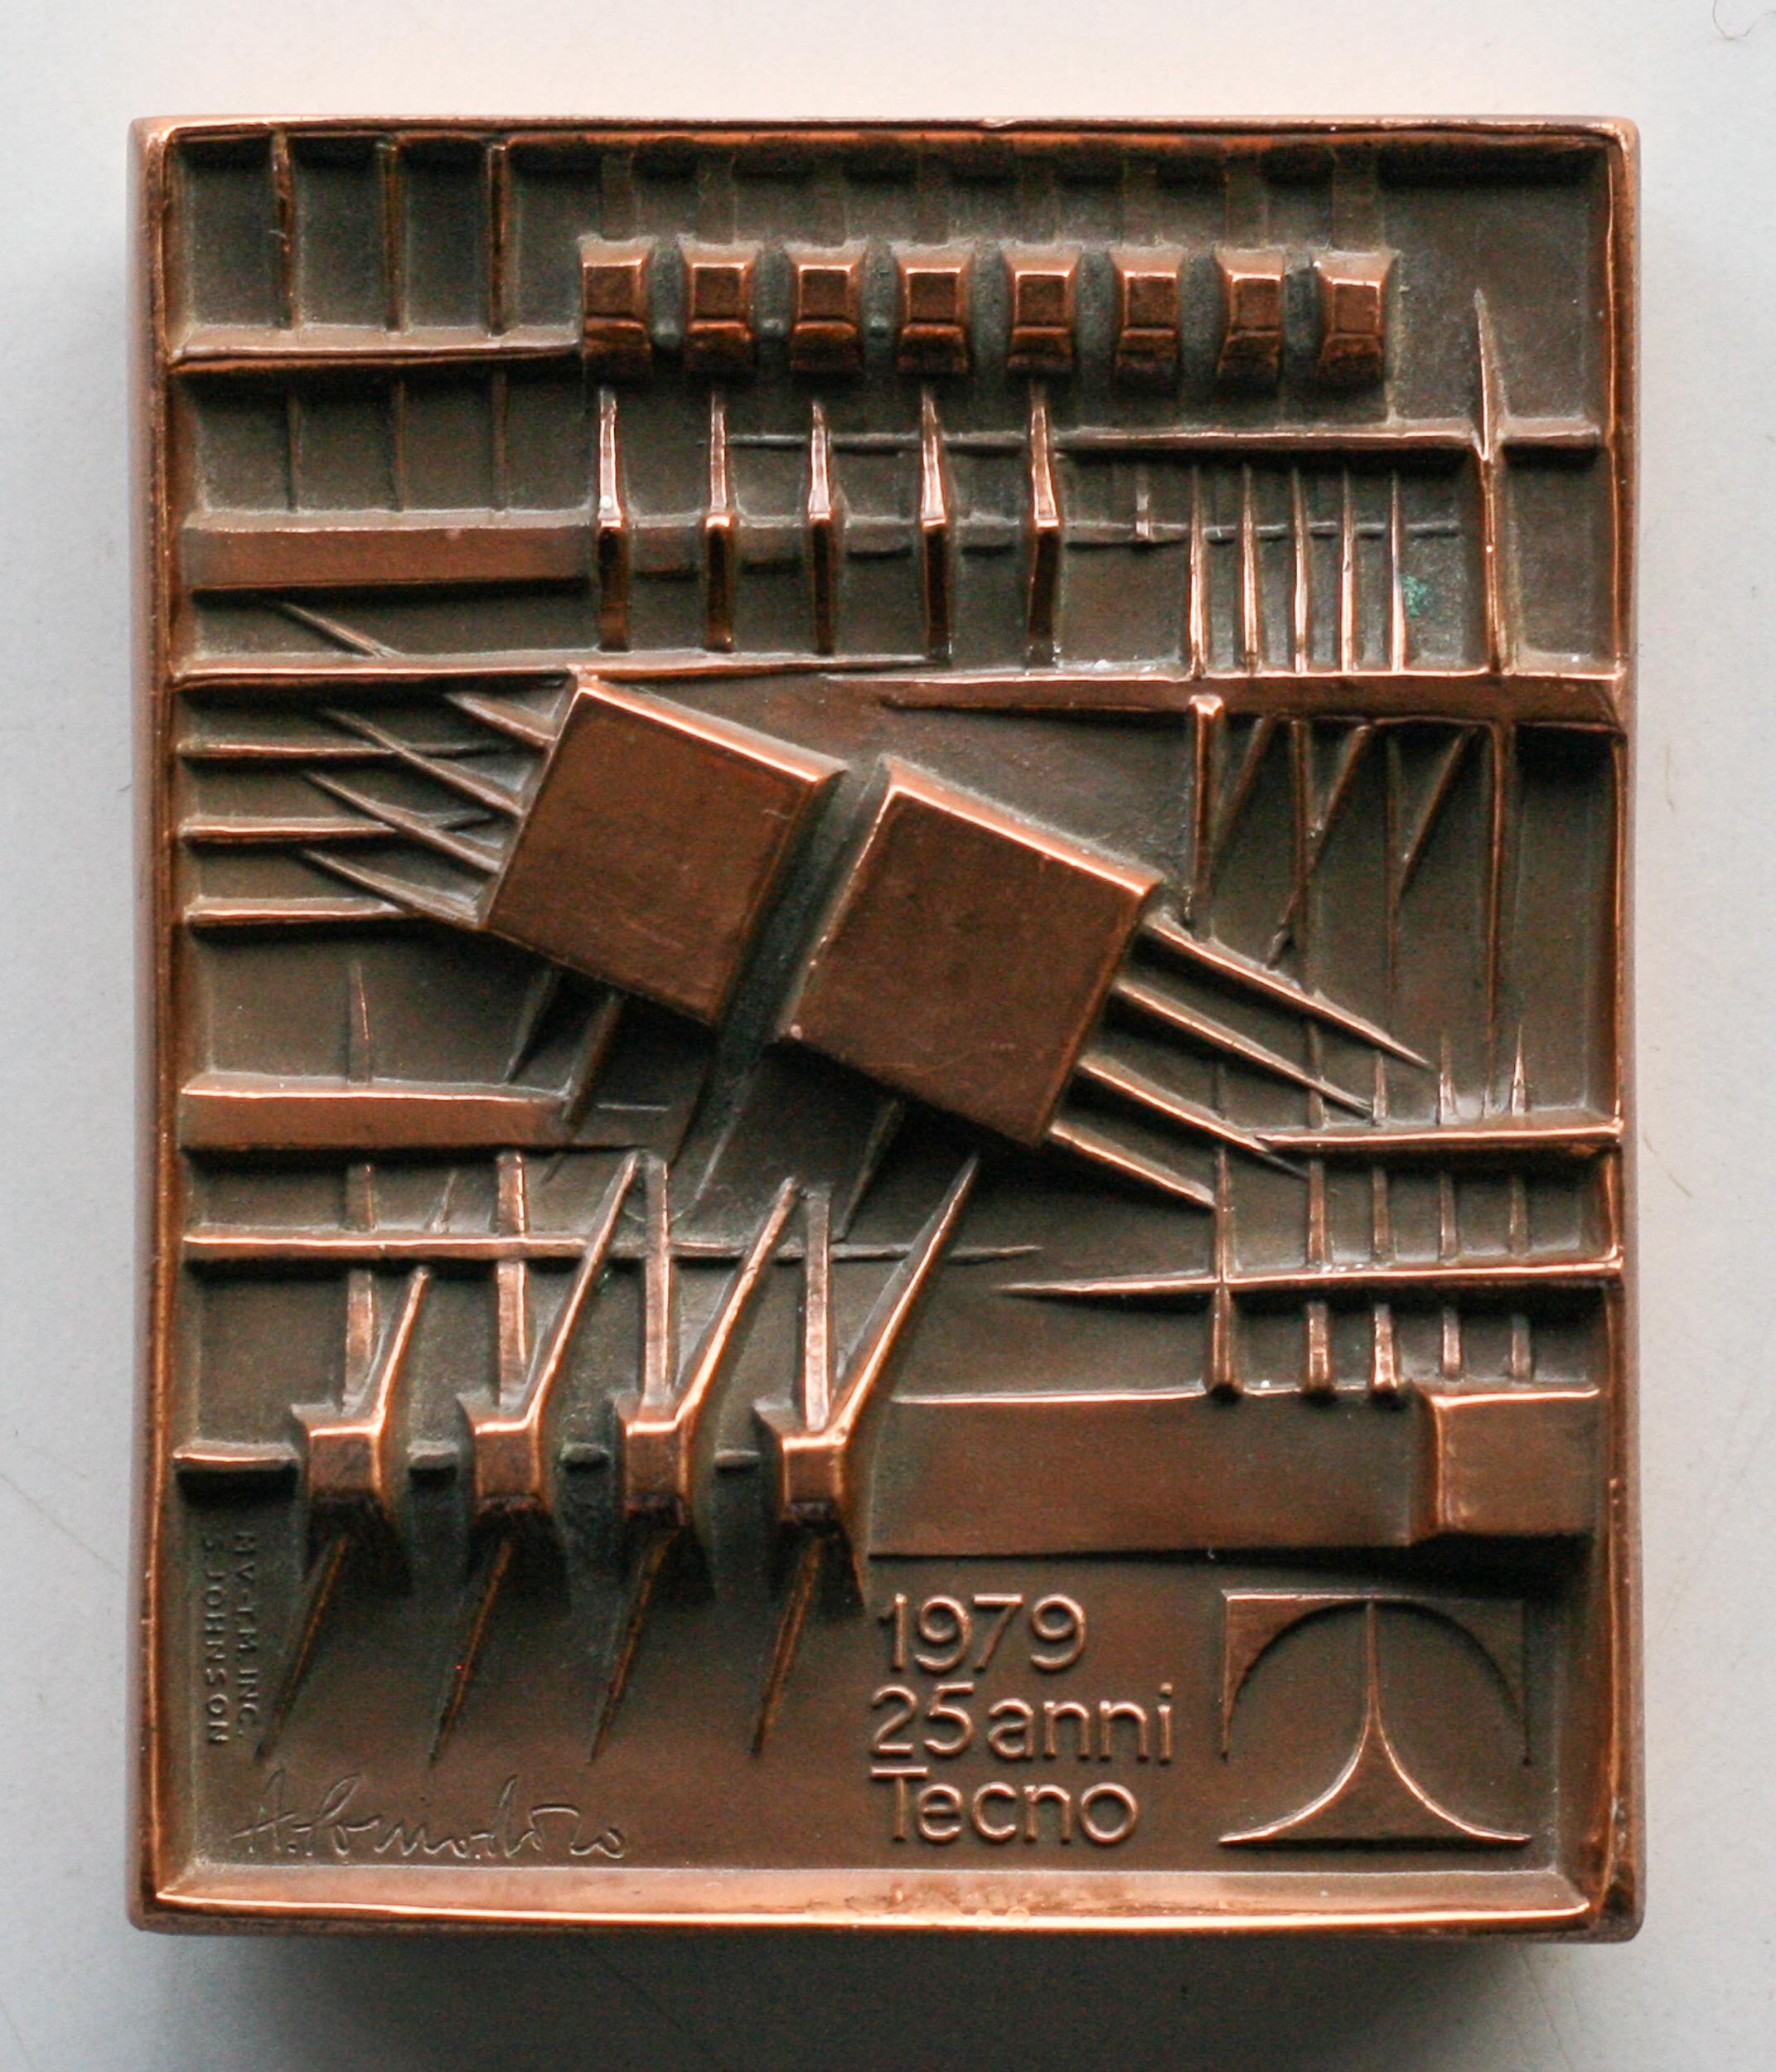 Arnaldo Pomodoro (born in 1926). 
Small plaque in bronze, with two-sided geometric image.
For the 25th anniversary of Tecno Milan, dated 1979. 
Incised signature A. Pomodoro and stamped S. Johnson, numbered 12/B.
Issued by Stefano Johnson of Milan.